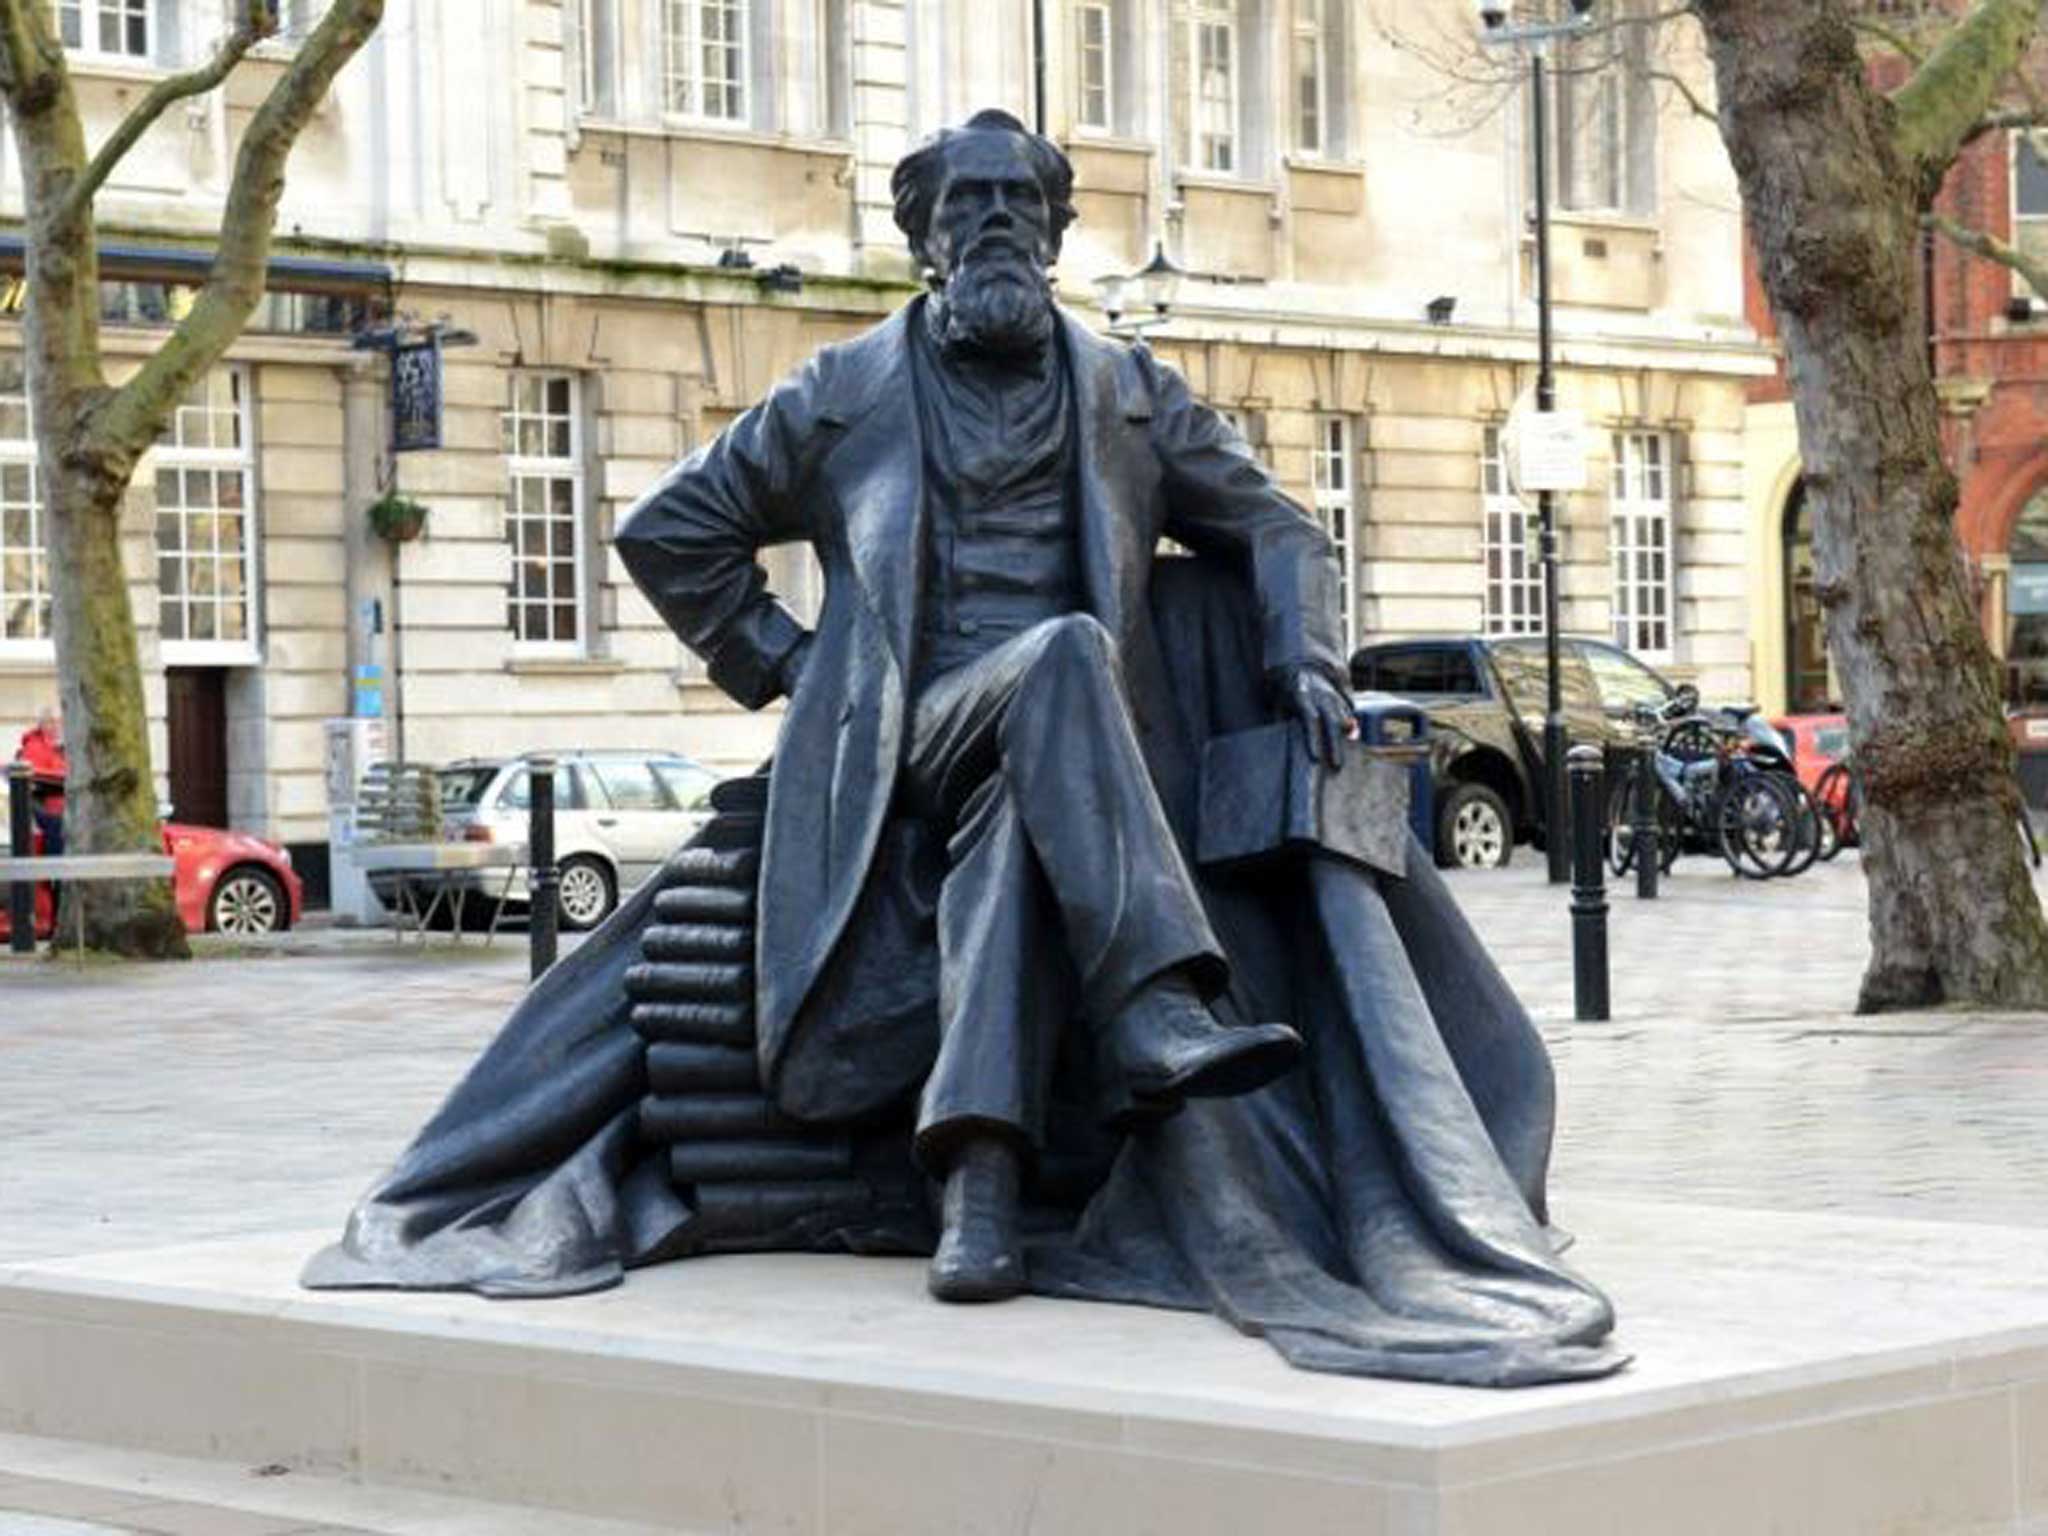 On a pedestal: The statue of Charles Dickens proves that even the most celebrated people cannot control posterity